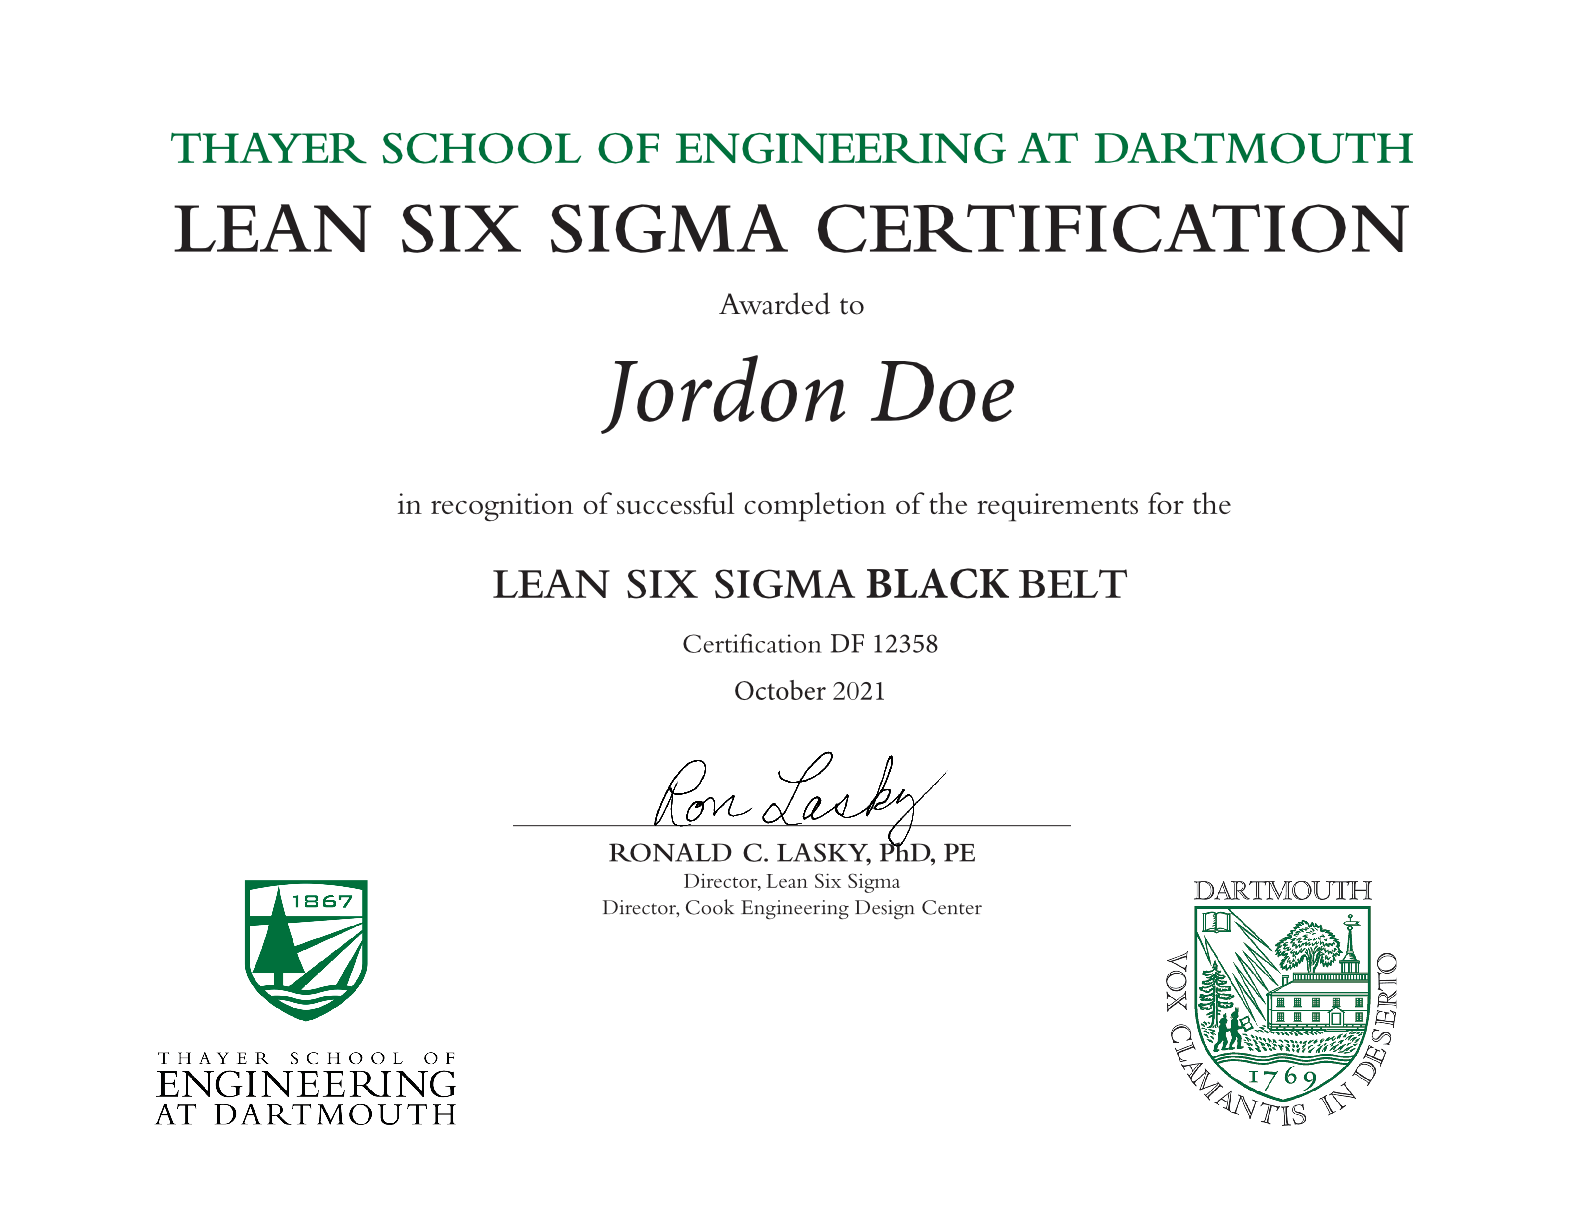 Thayer School of Engineering at Dartmouth Lean Six Sigma Green Belt Certificate